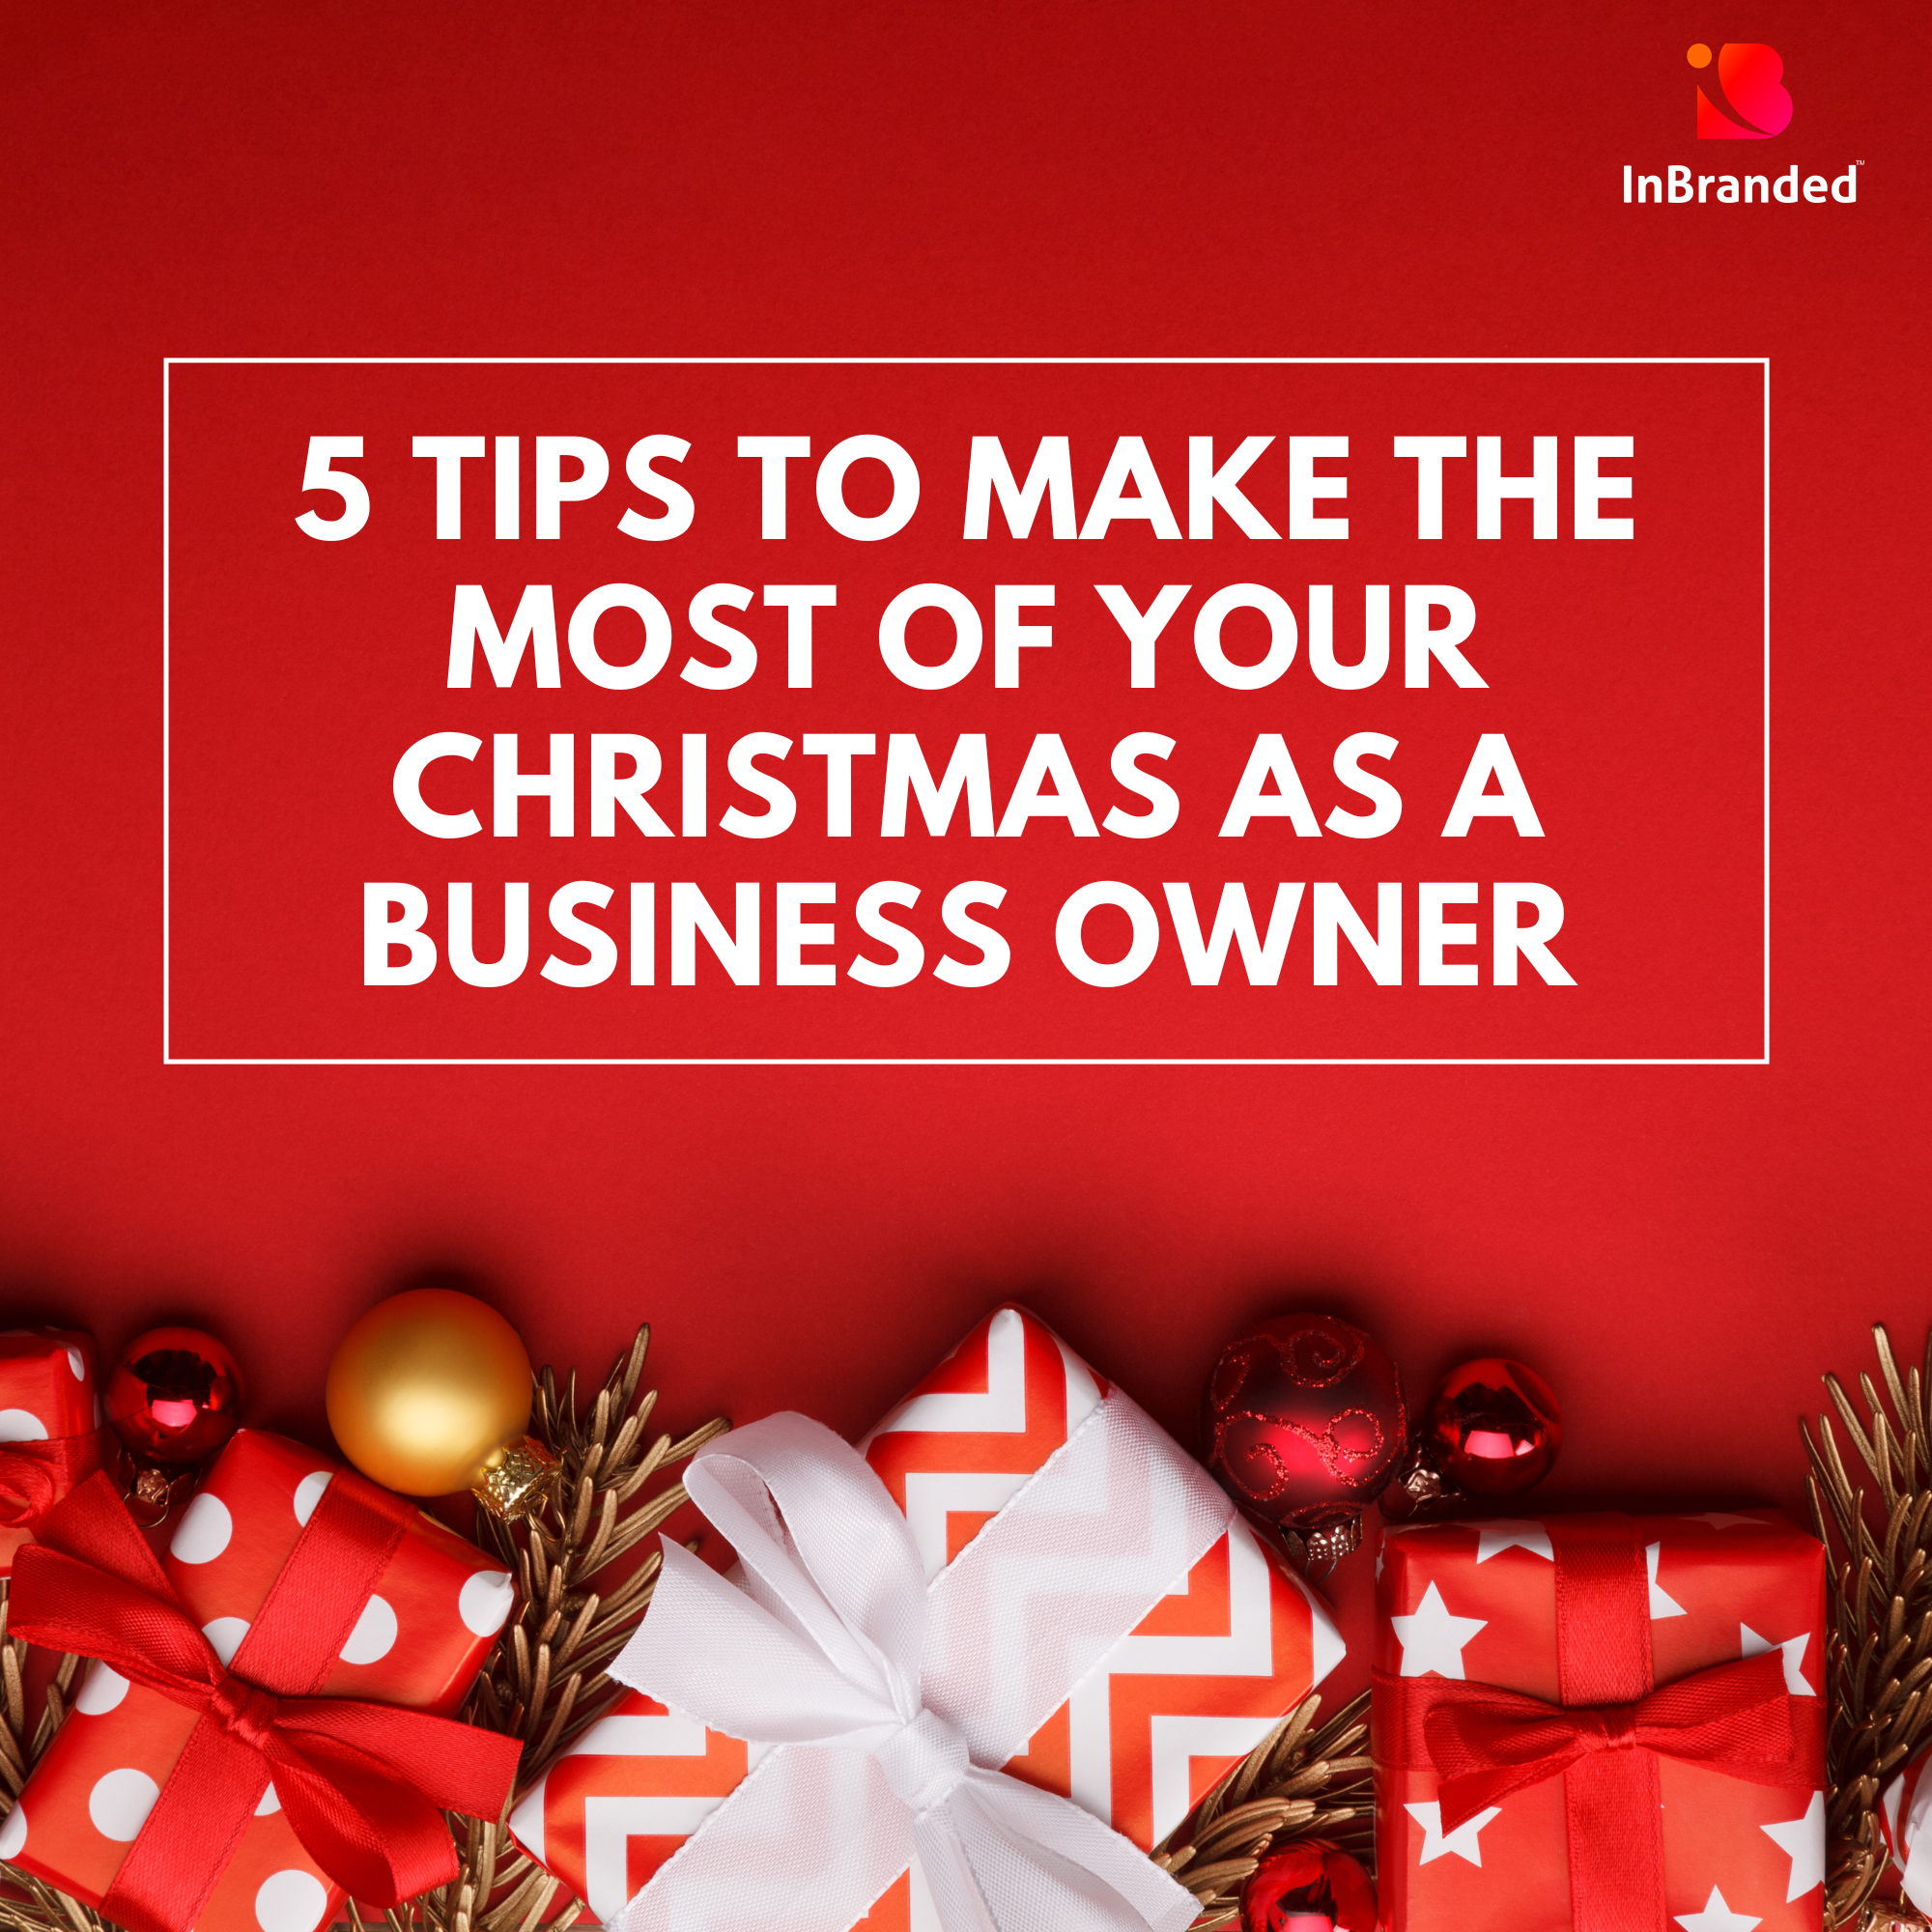 5 Tips to Make the most of Your Christmas as a Business Owner